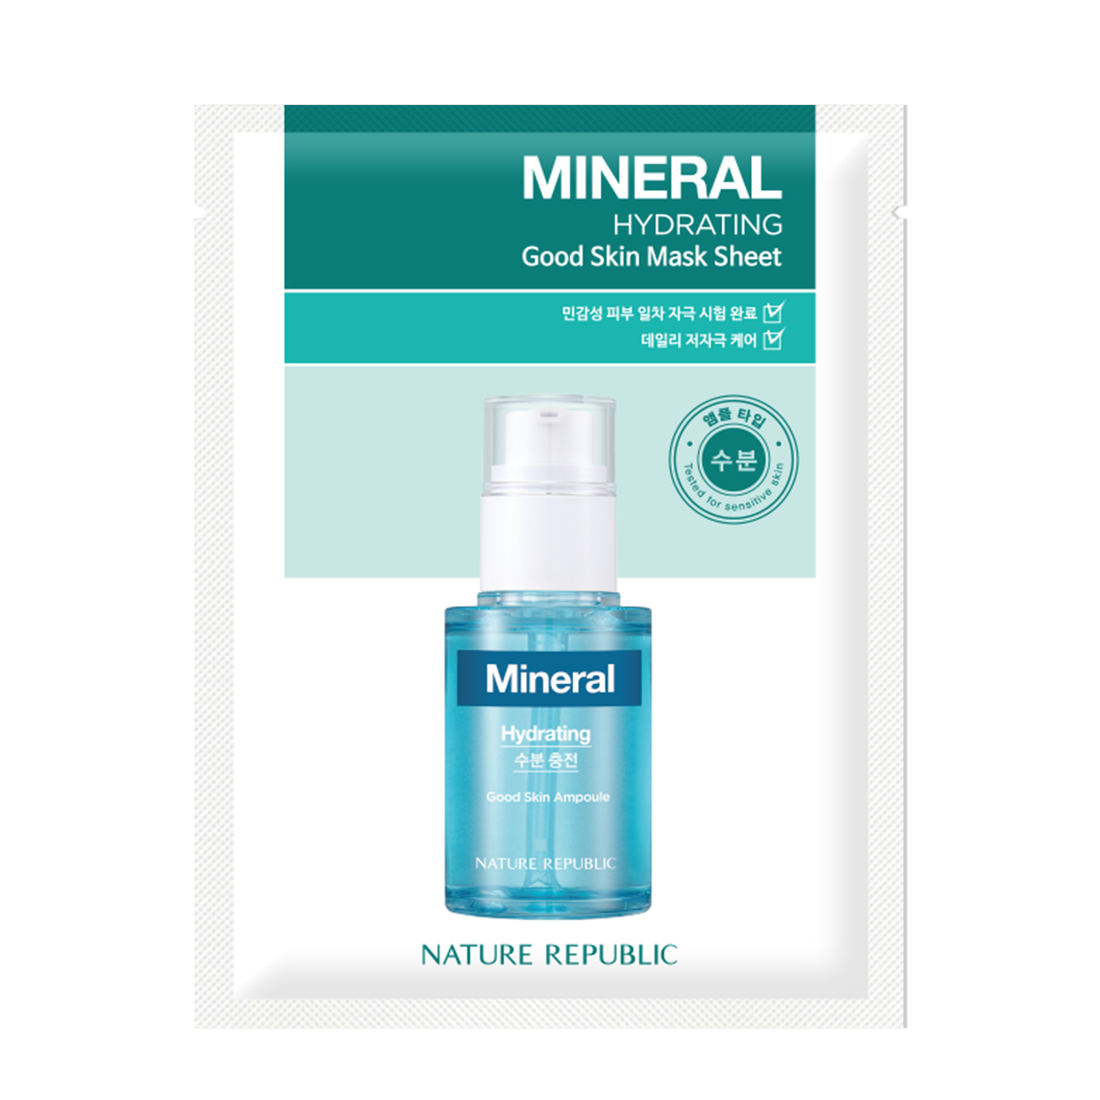 [Mineral] Good Skin Hydrating - Mineral Ampoule, Mineral Cream, 2x Mineral Mask Sheet